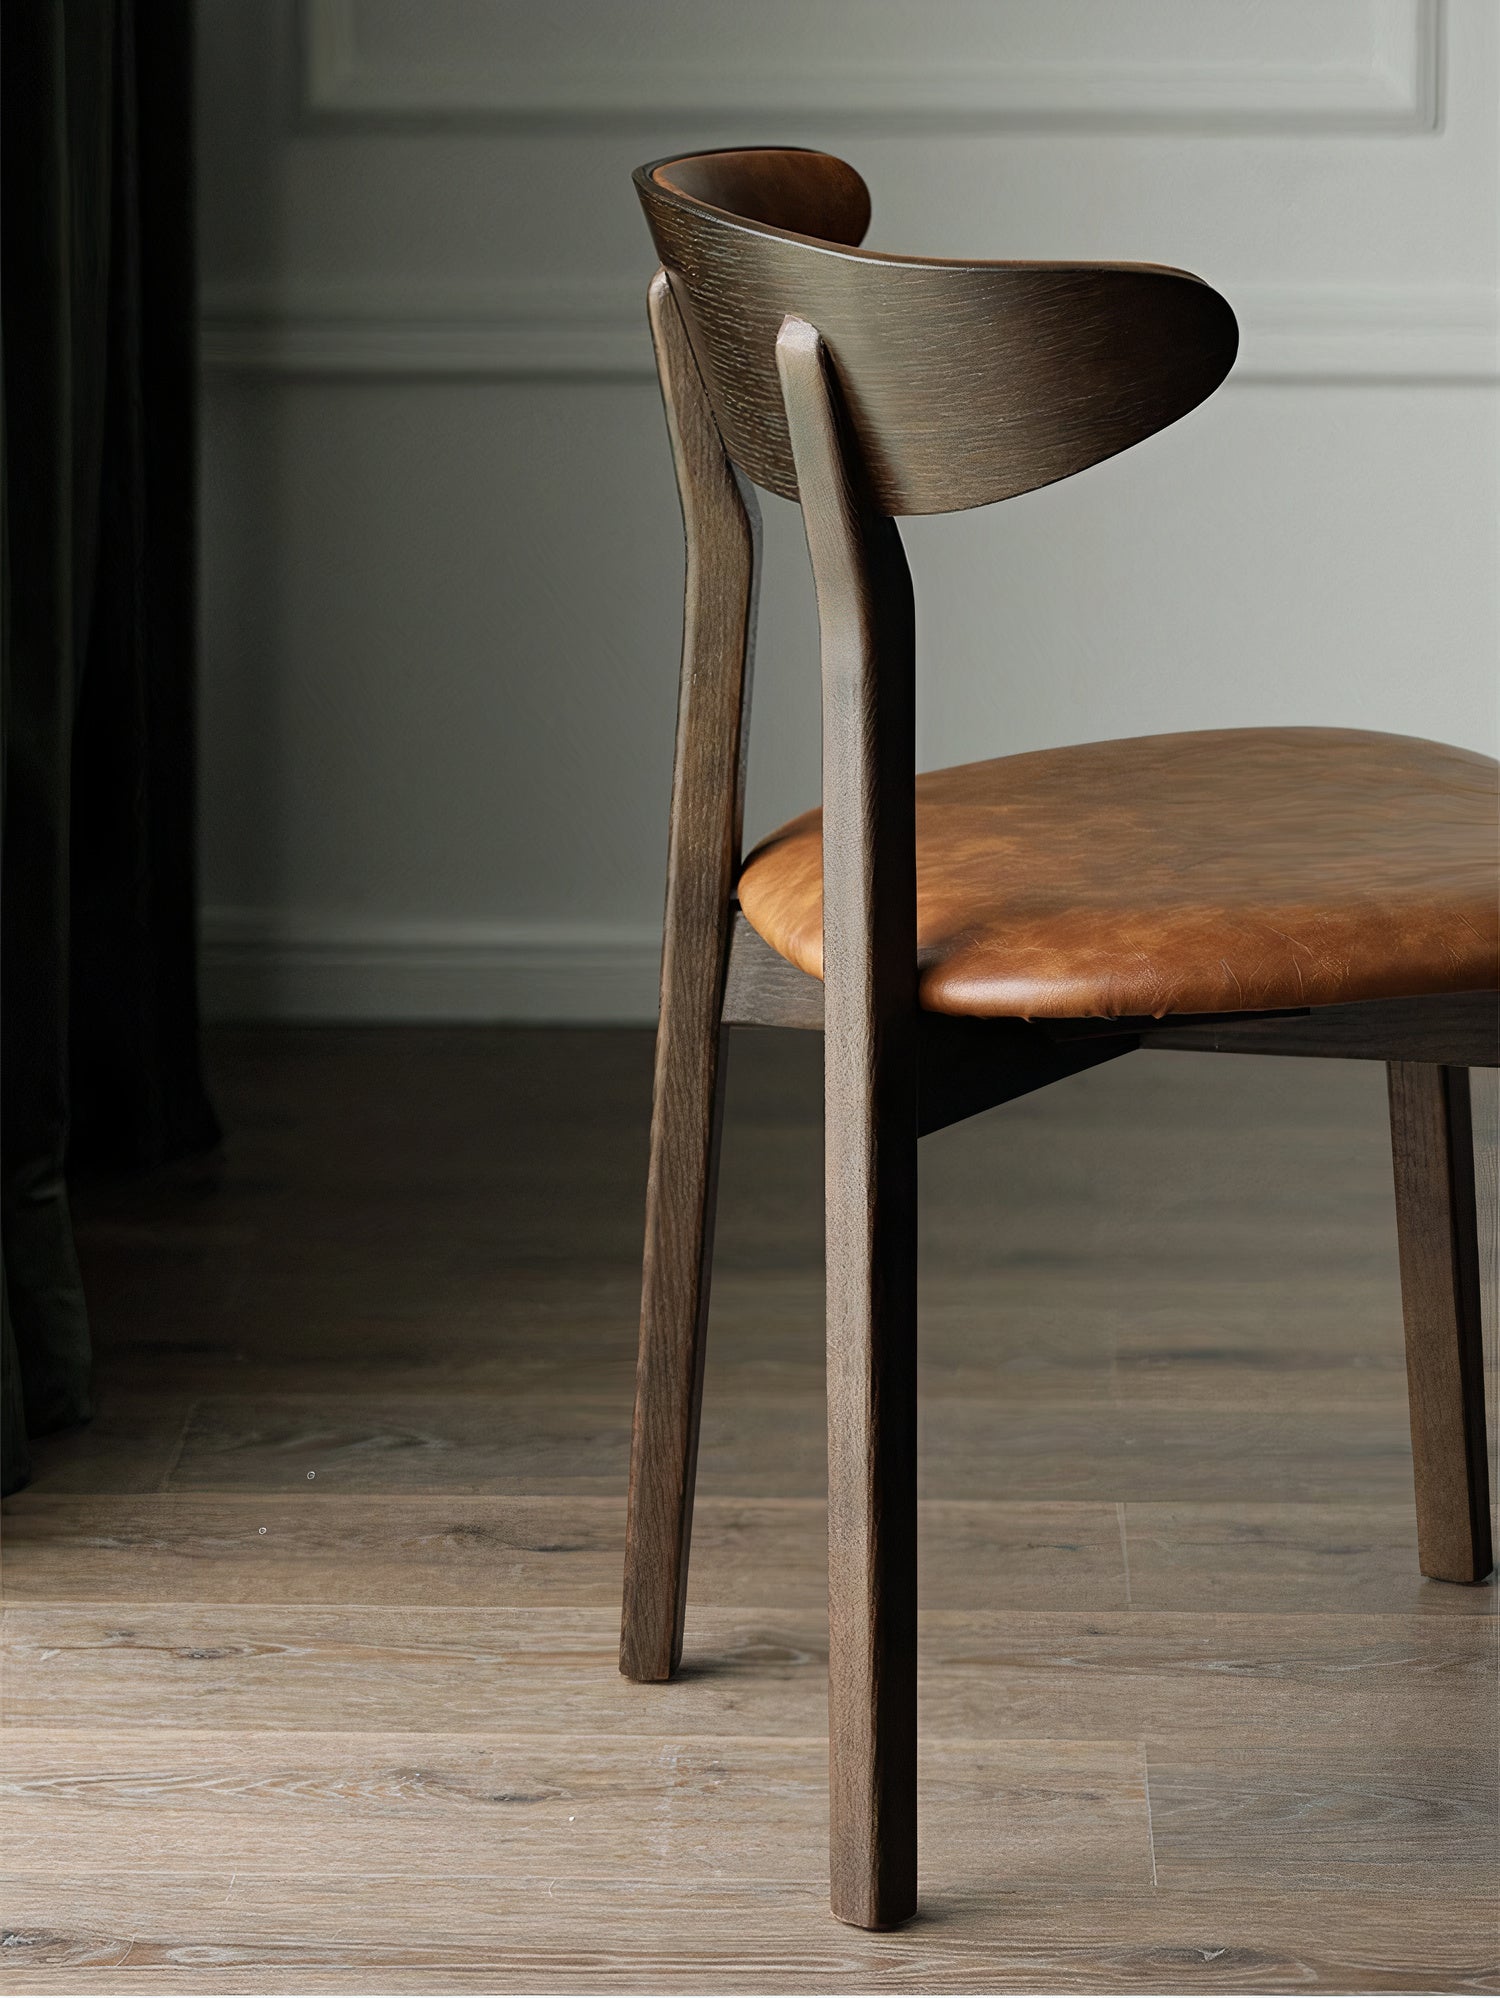 Brown Leather Dining Chair